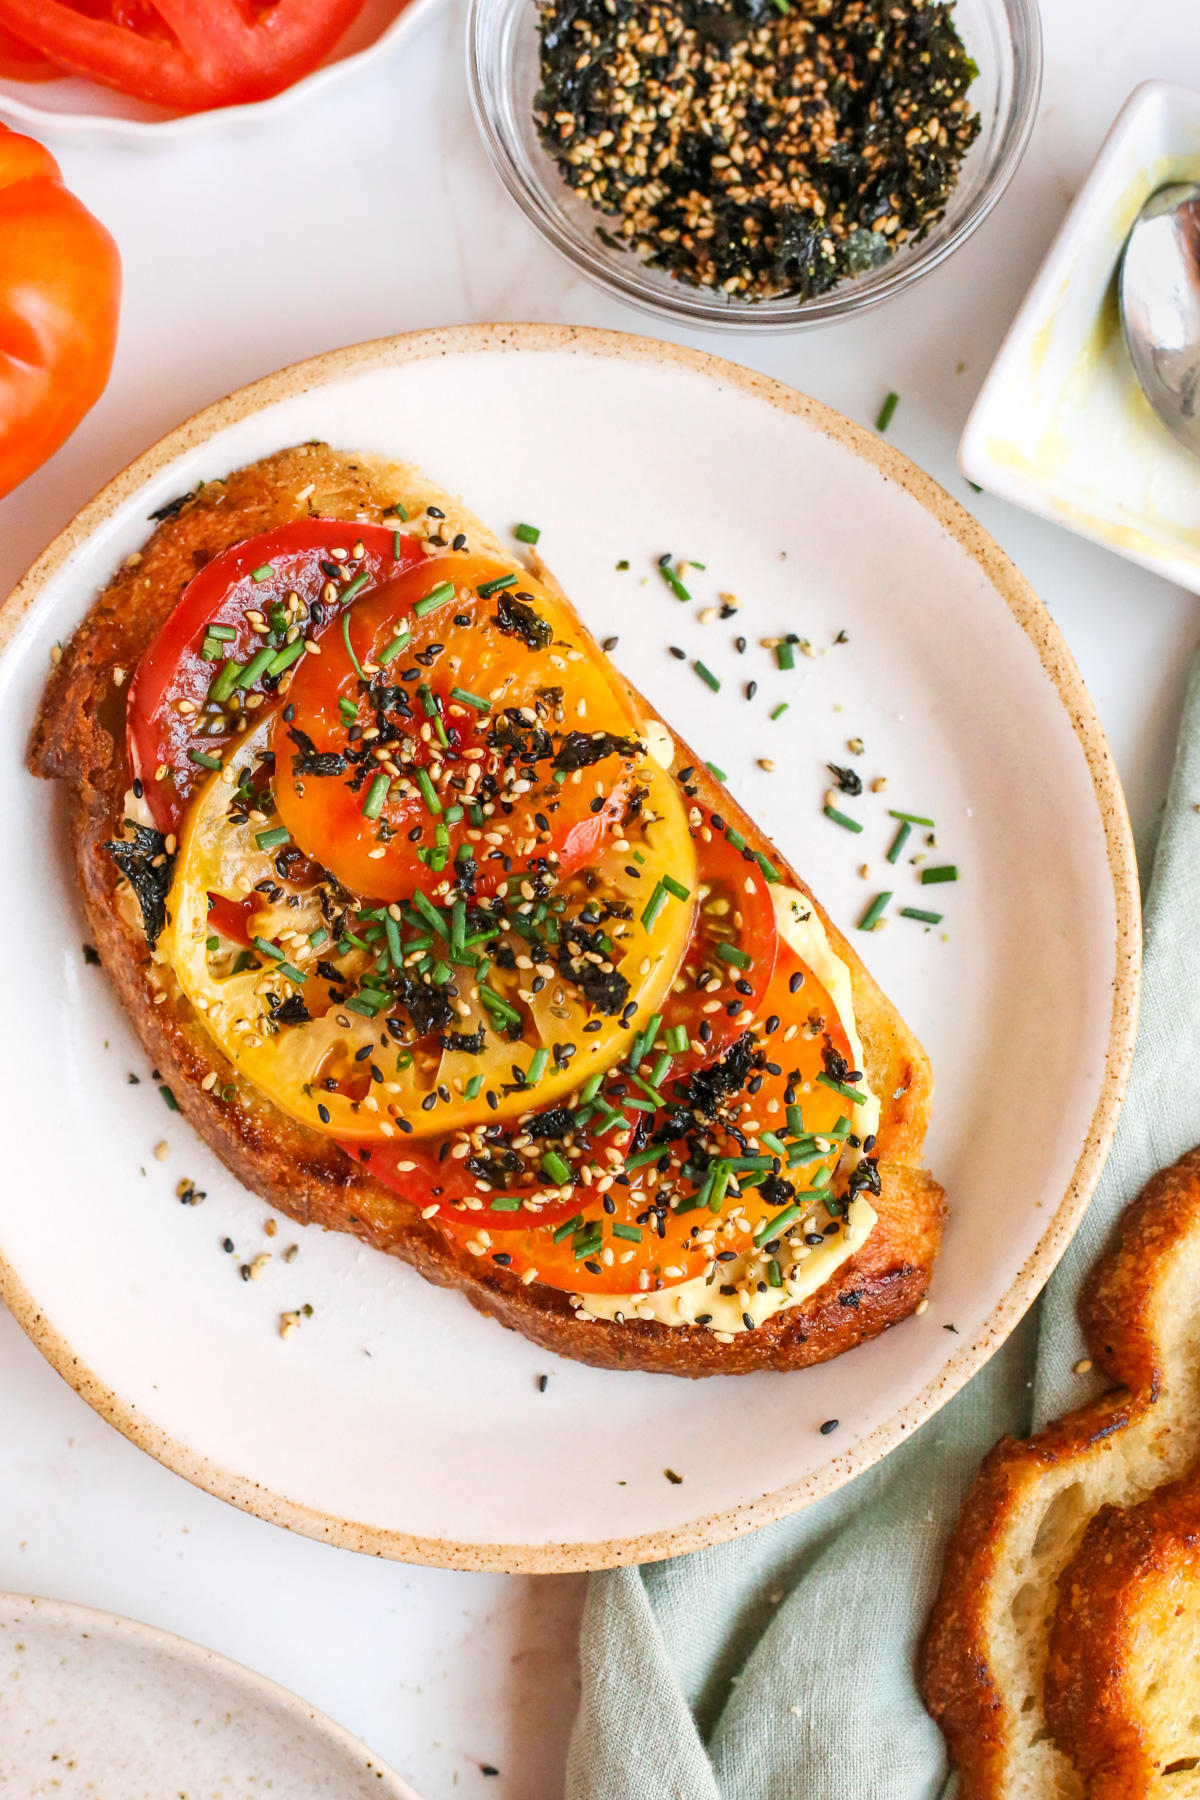 Overhead view of a slice of tomato toast on sourdough bread, with colorful red, orange, and yellow heirloom tomato slices, topped with furikake and chopped chives, served on a ceramic dish on a kitchen countertop